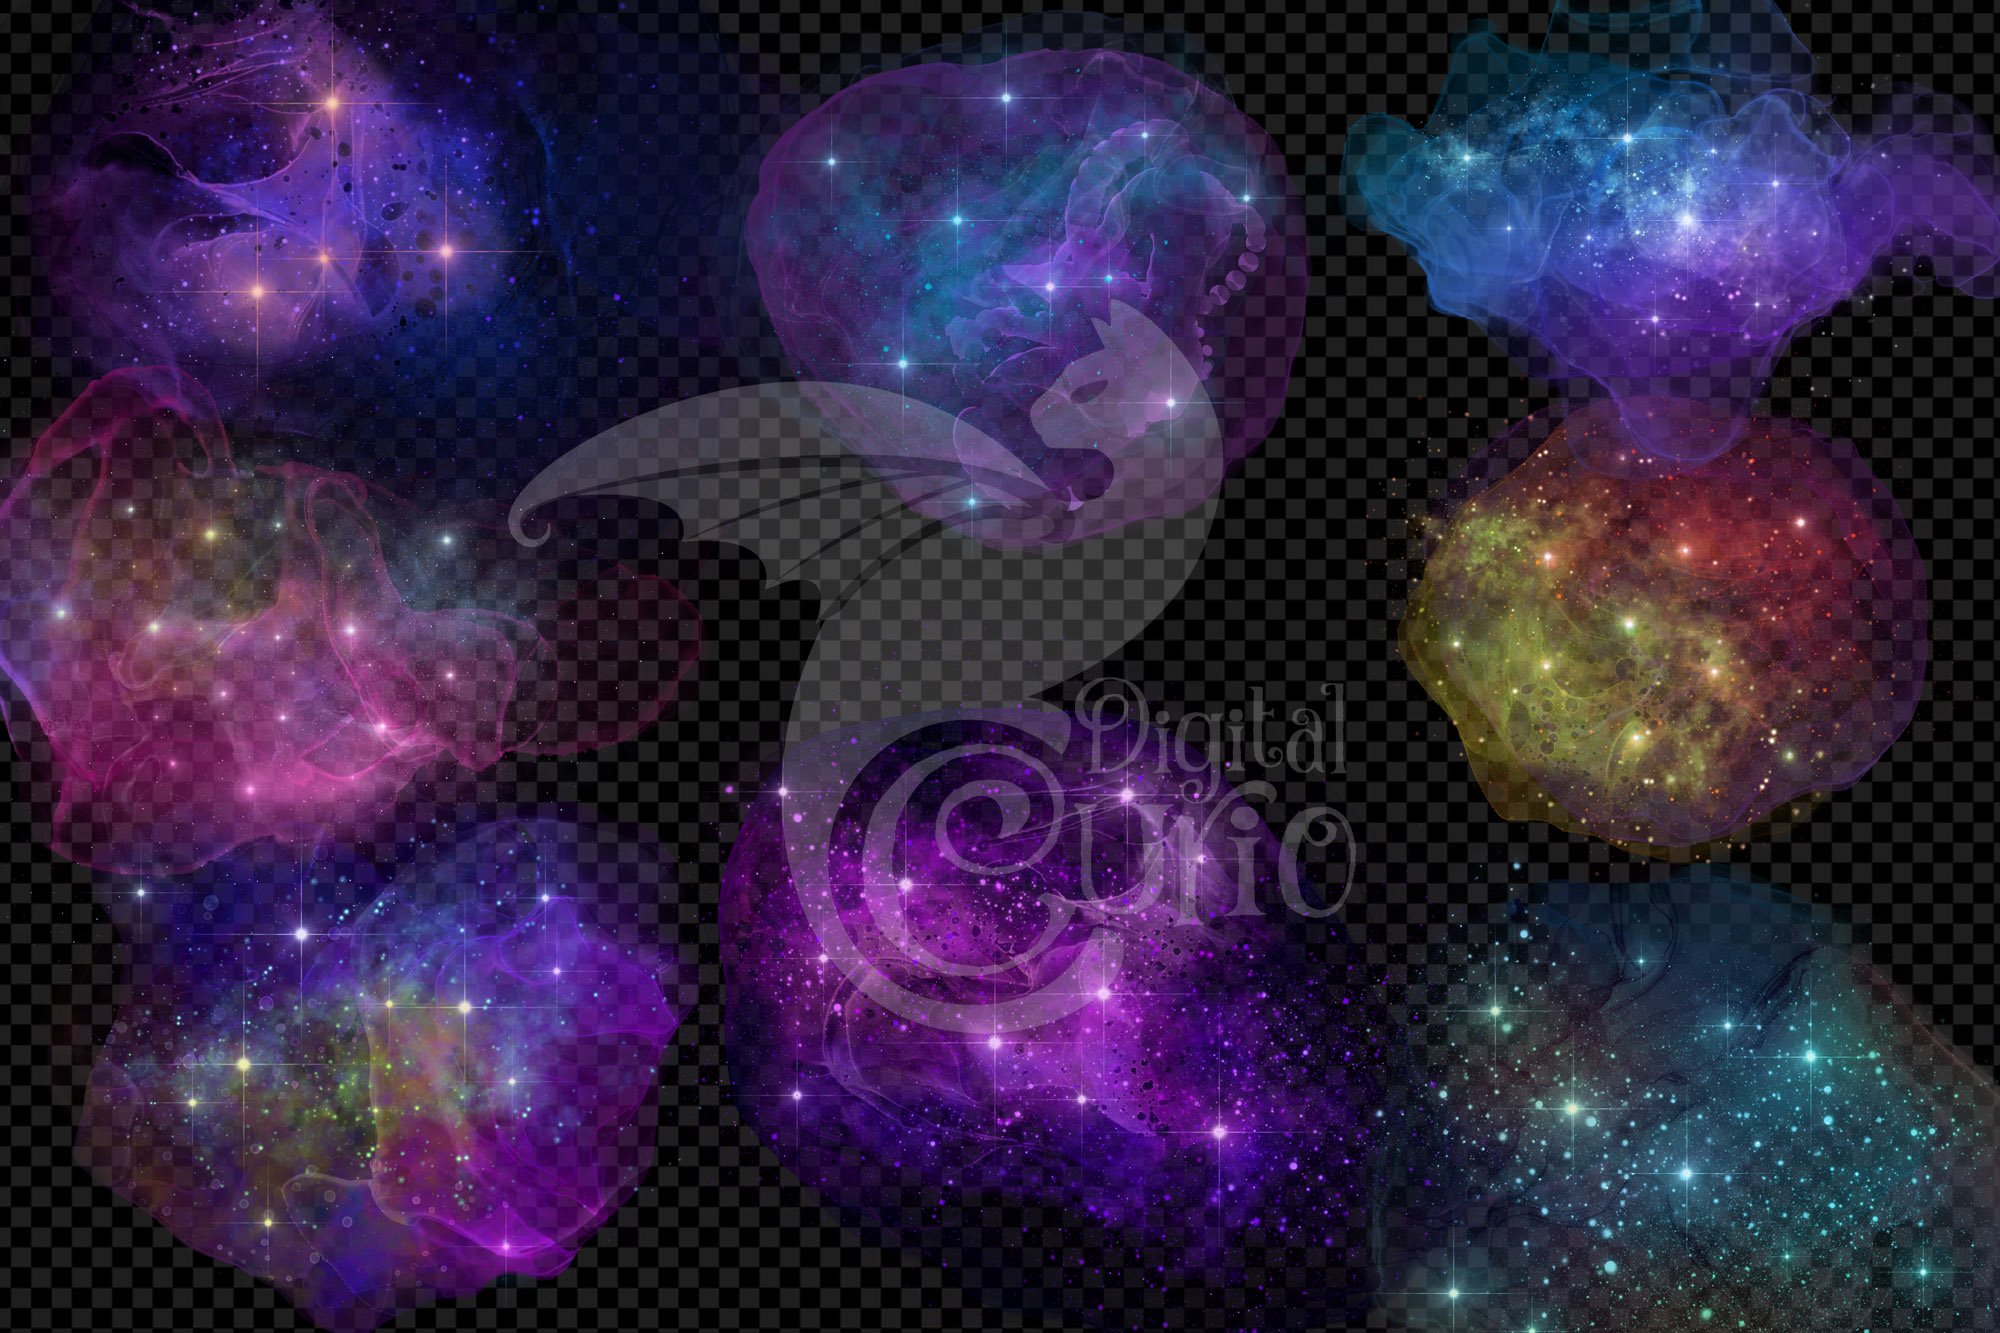 Ethereal Space Overlays preview image.